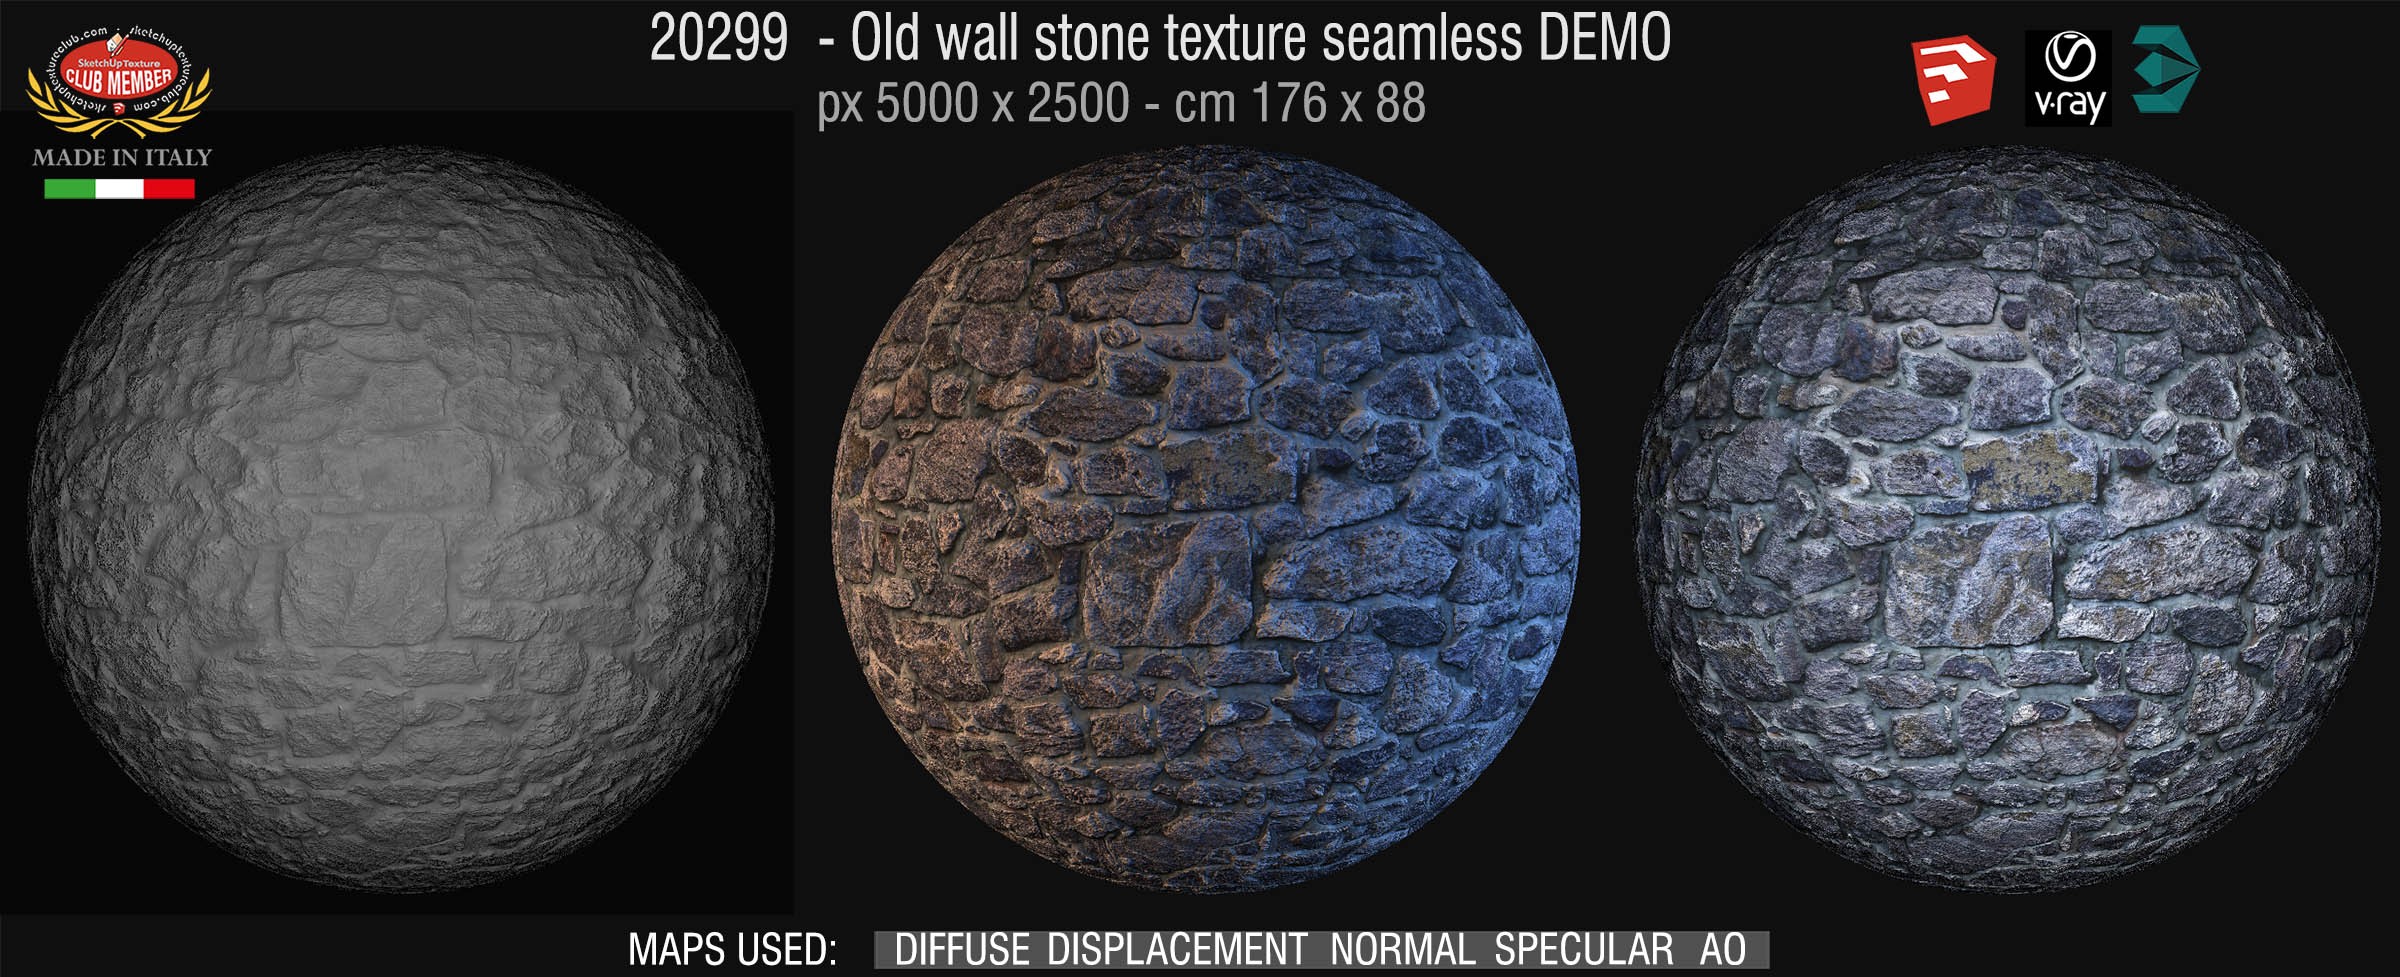 20299 HR Old wall stone texture seamless + maps DEMO